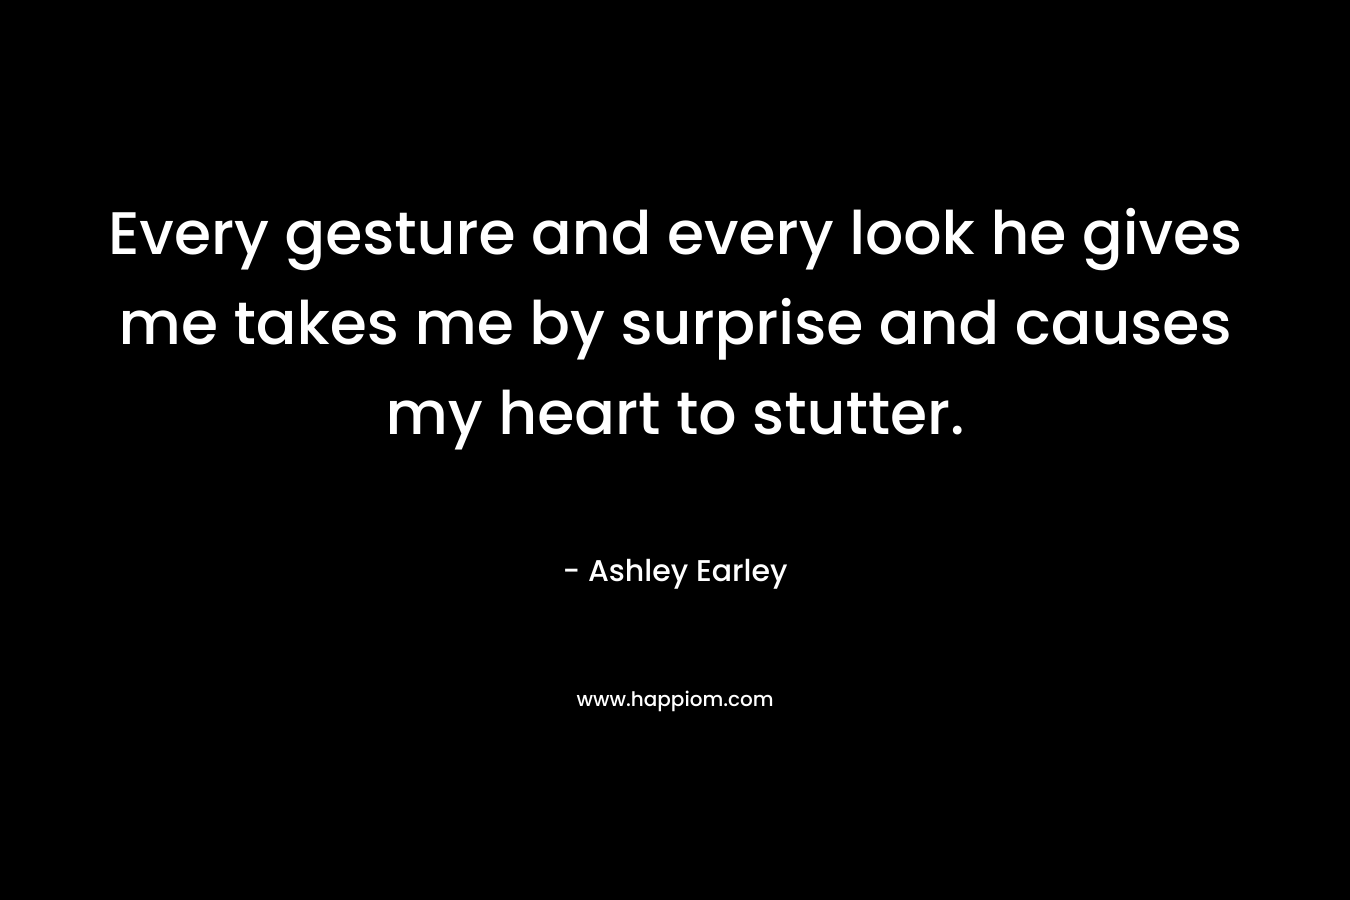 Every gesture and every look he gives me takes me by surprise and causes my heart to stutter. – Ashley Earley